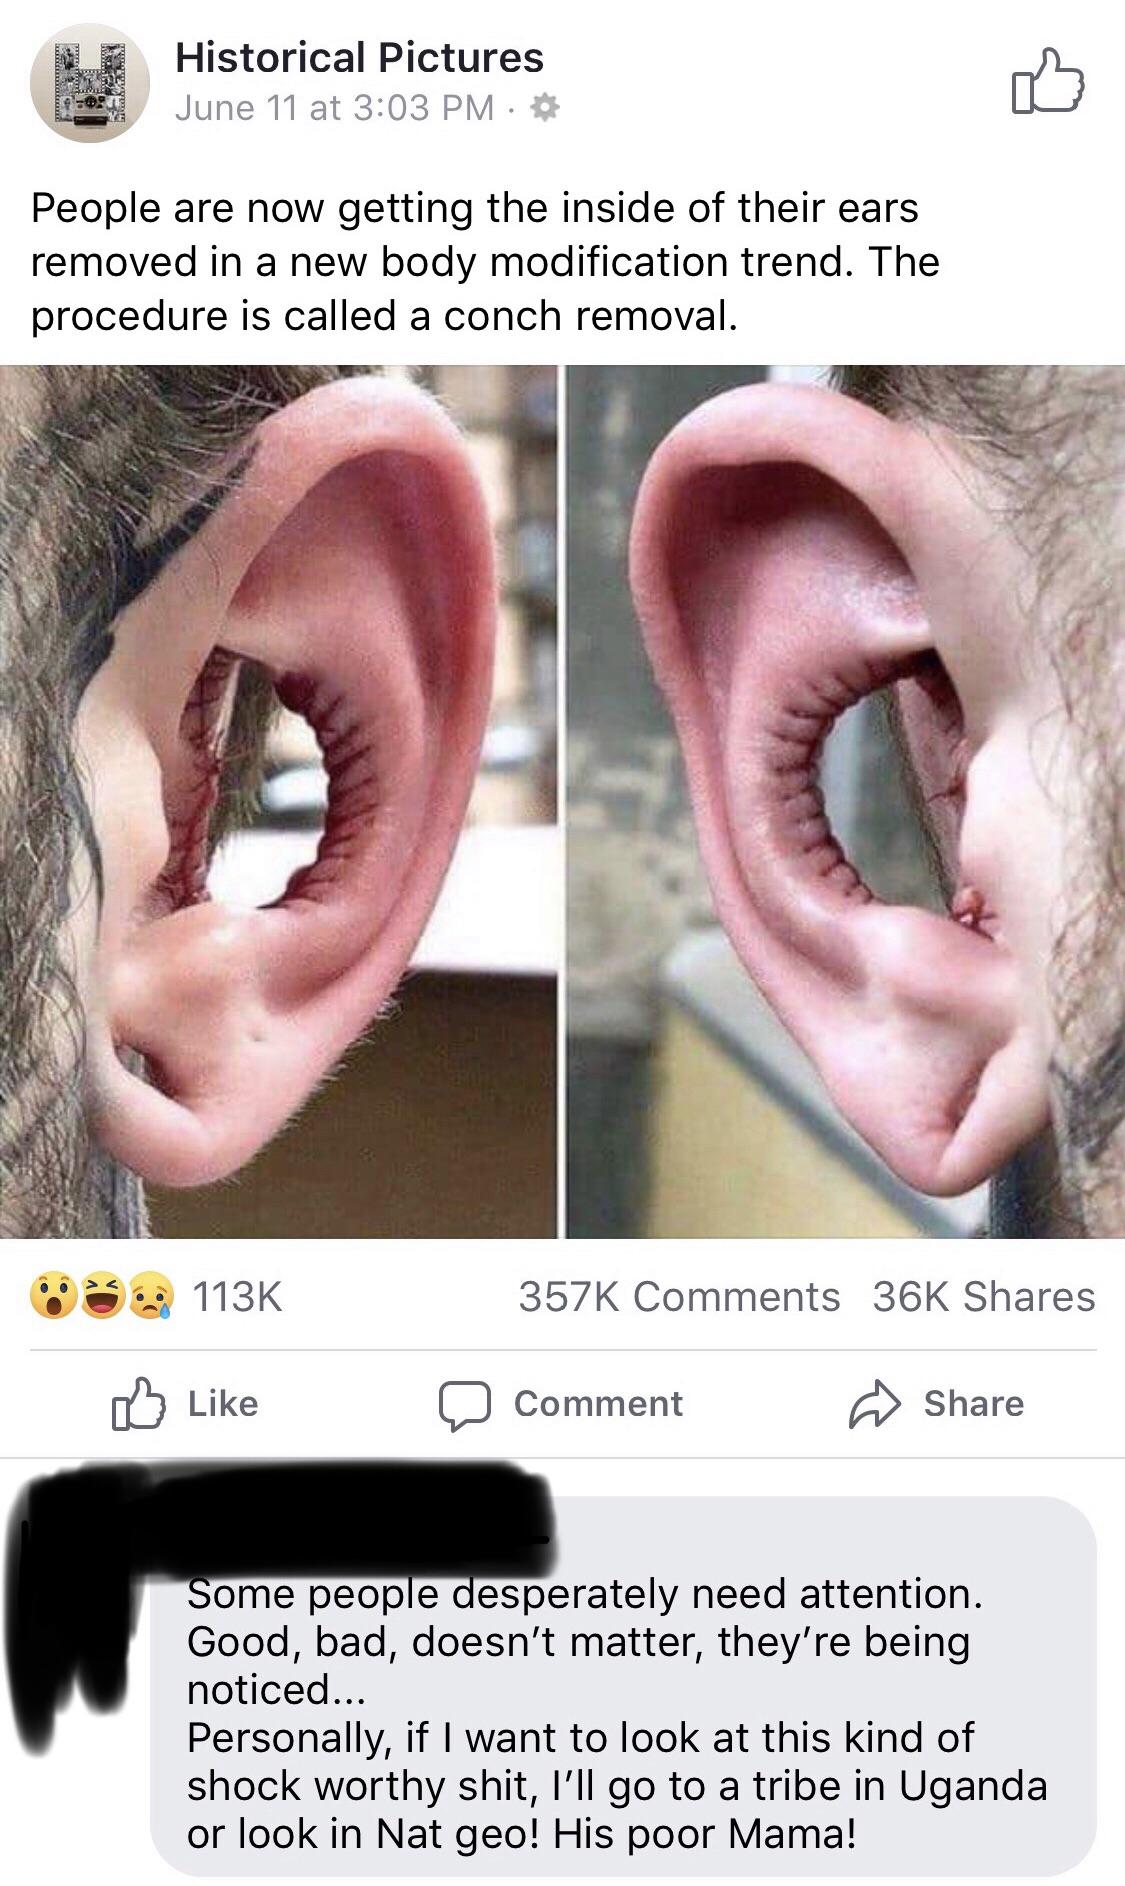 ear conch removal - Historical Pictures June 11 at . People are now getting the inside of their ears removed in a new body modification trend. The procedure is called a conch removal. 36K Comment Some people desperately need attention. Good, bad, doesn't 